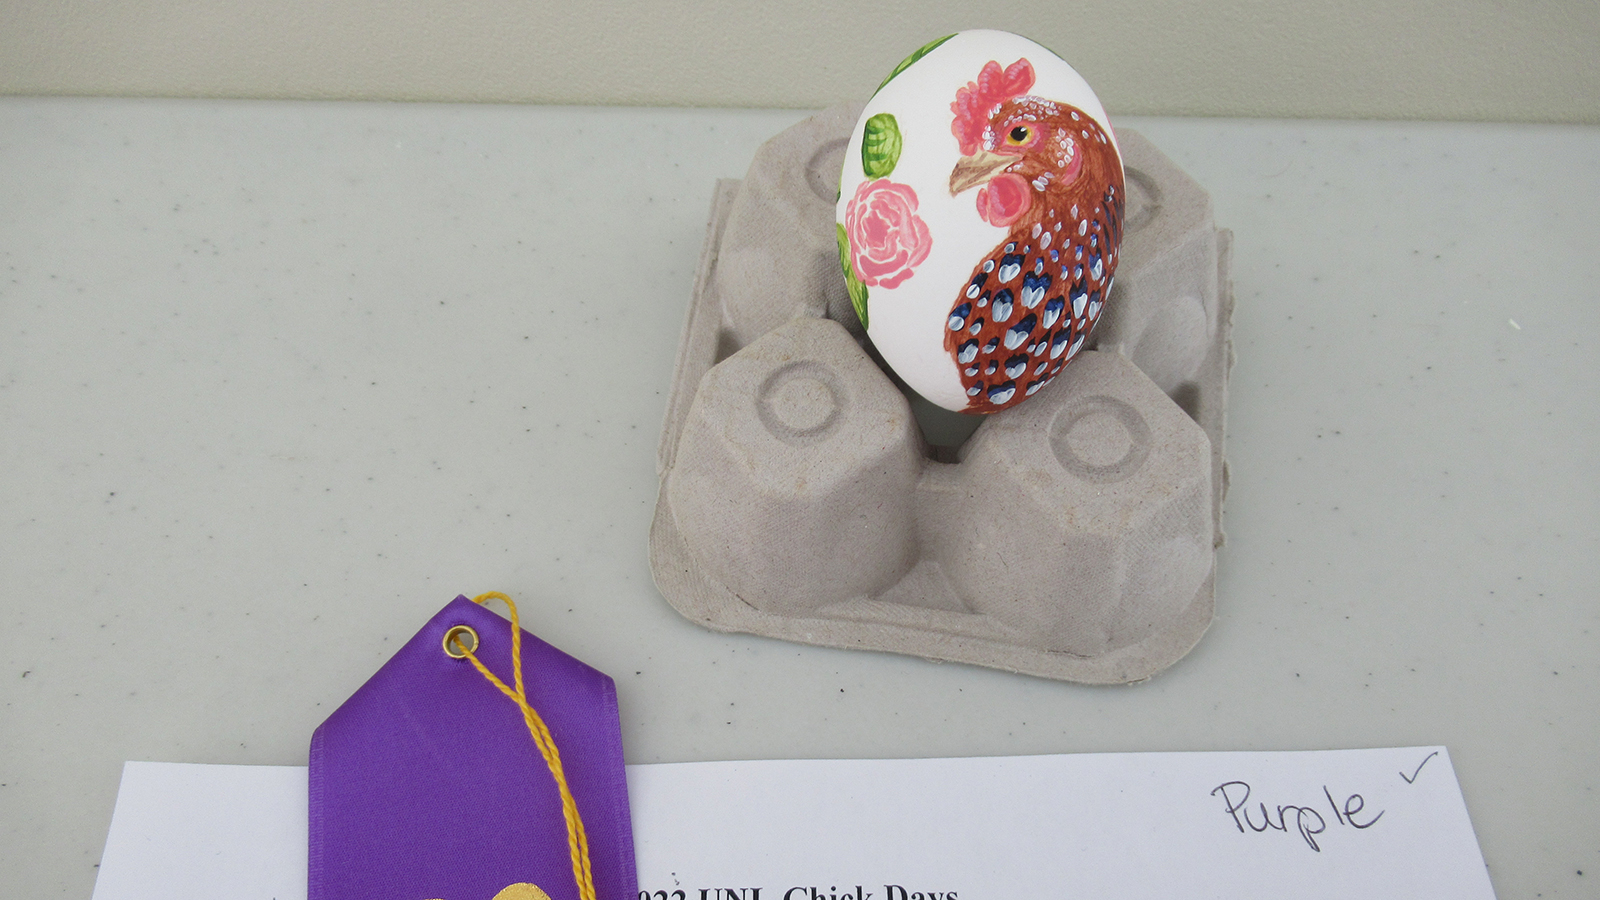 An egg shell painted decoratively